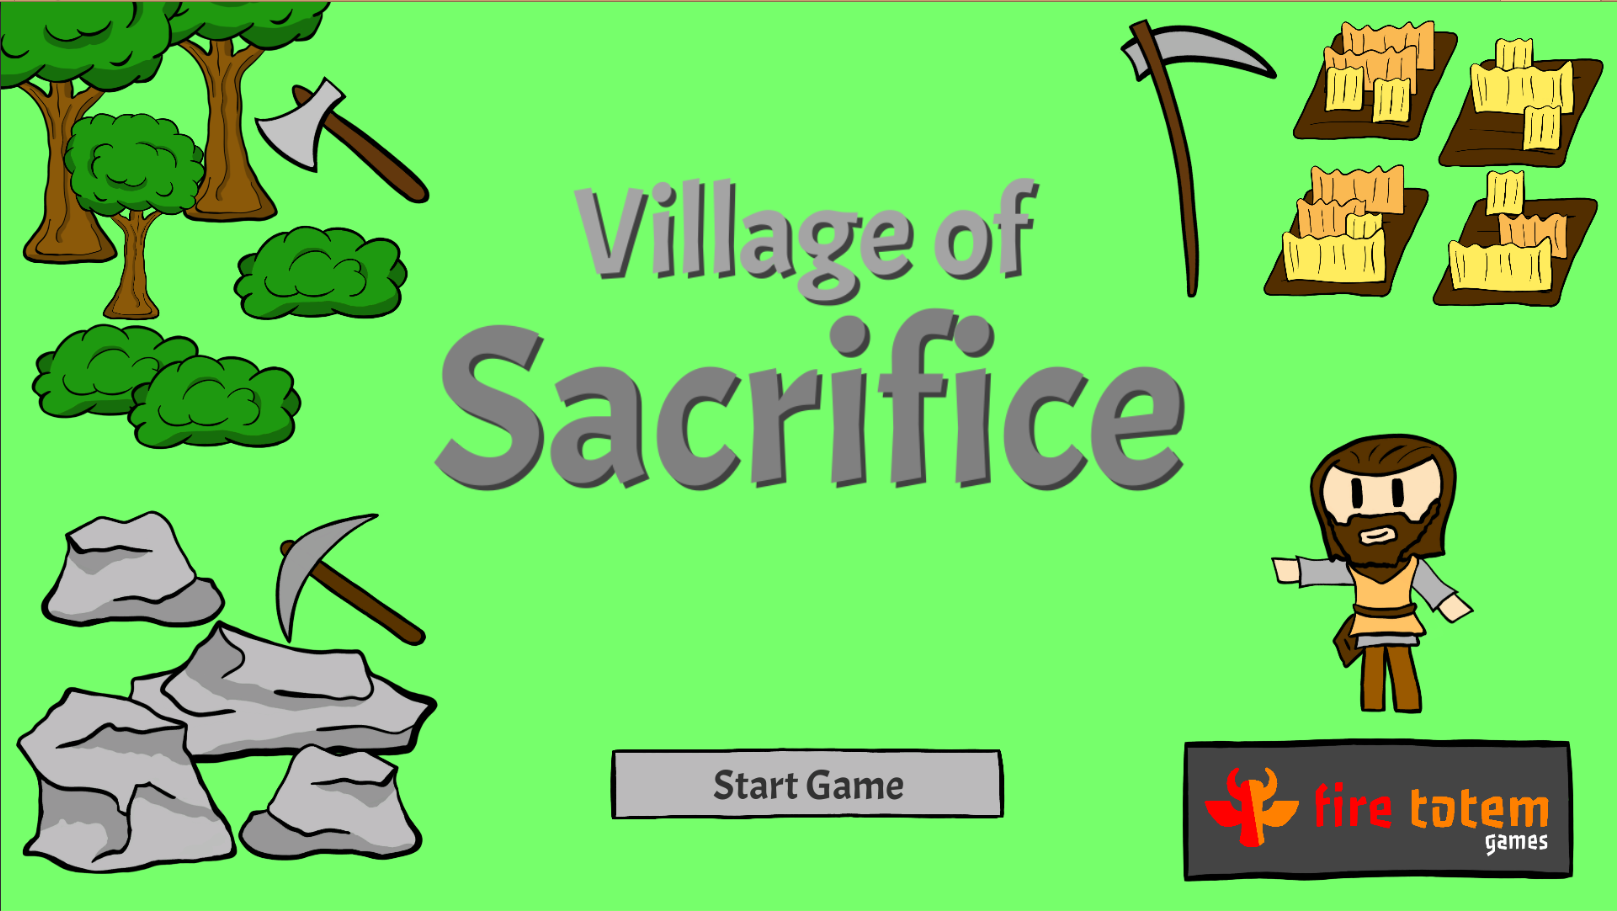 Sacrifices APK Download for Android Free